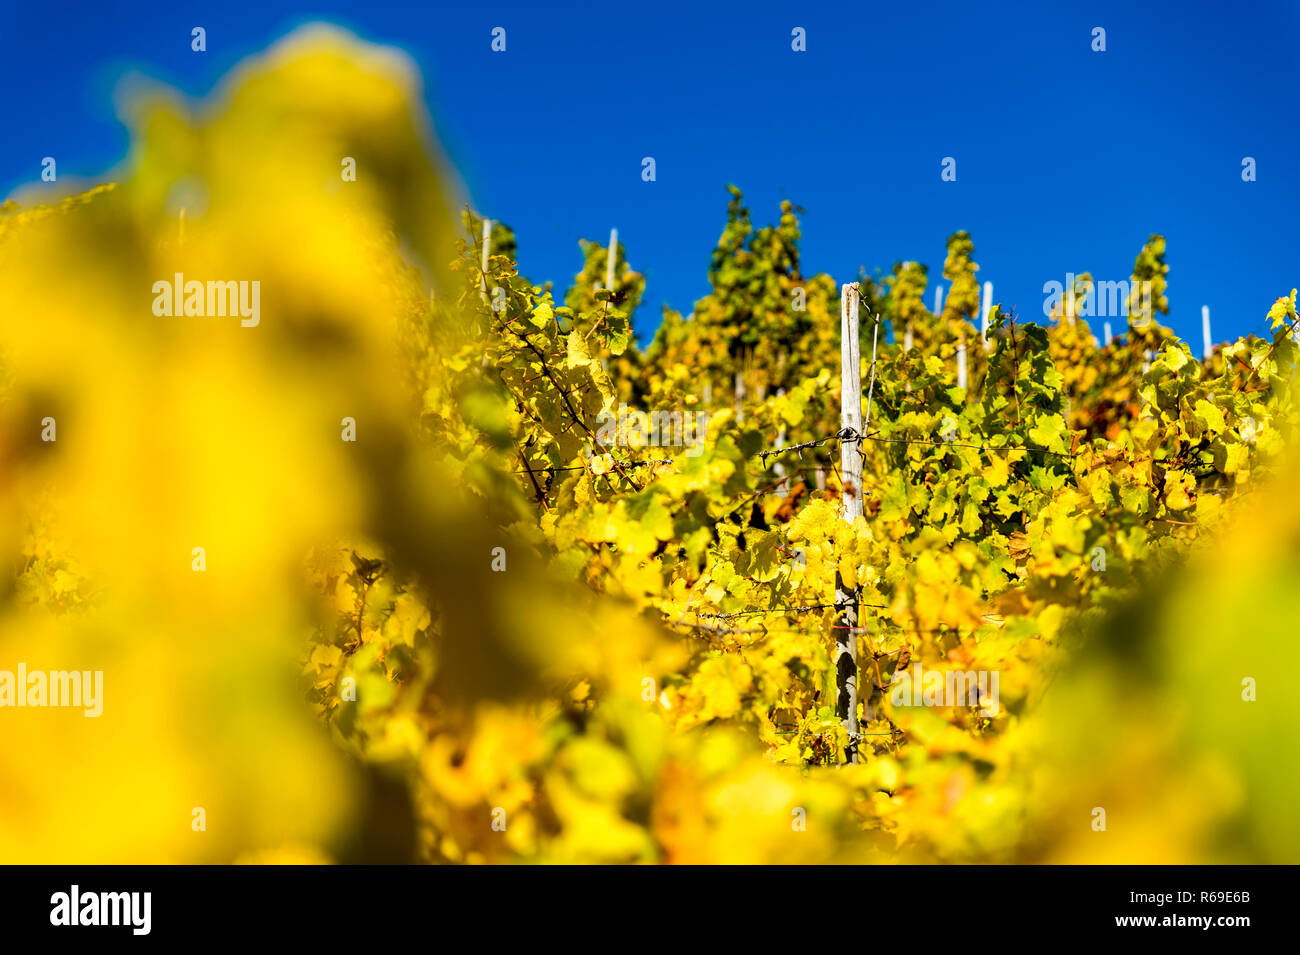 Gold-Colored Vine Leaves In The Sunshine In Front Of Blue Sky. Stock Photo